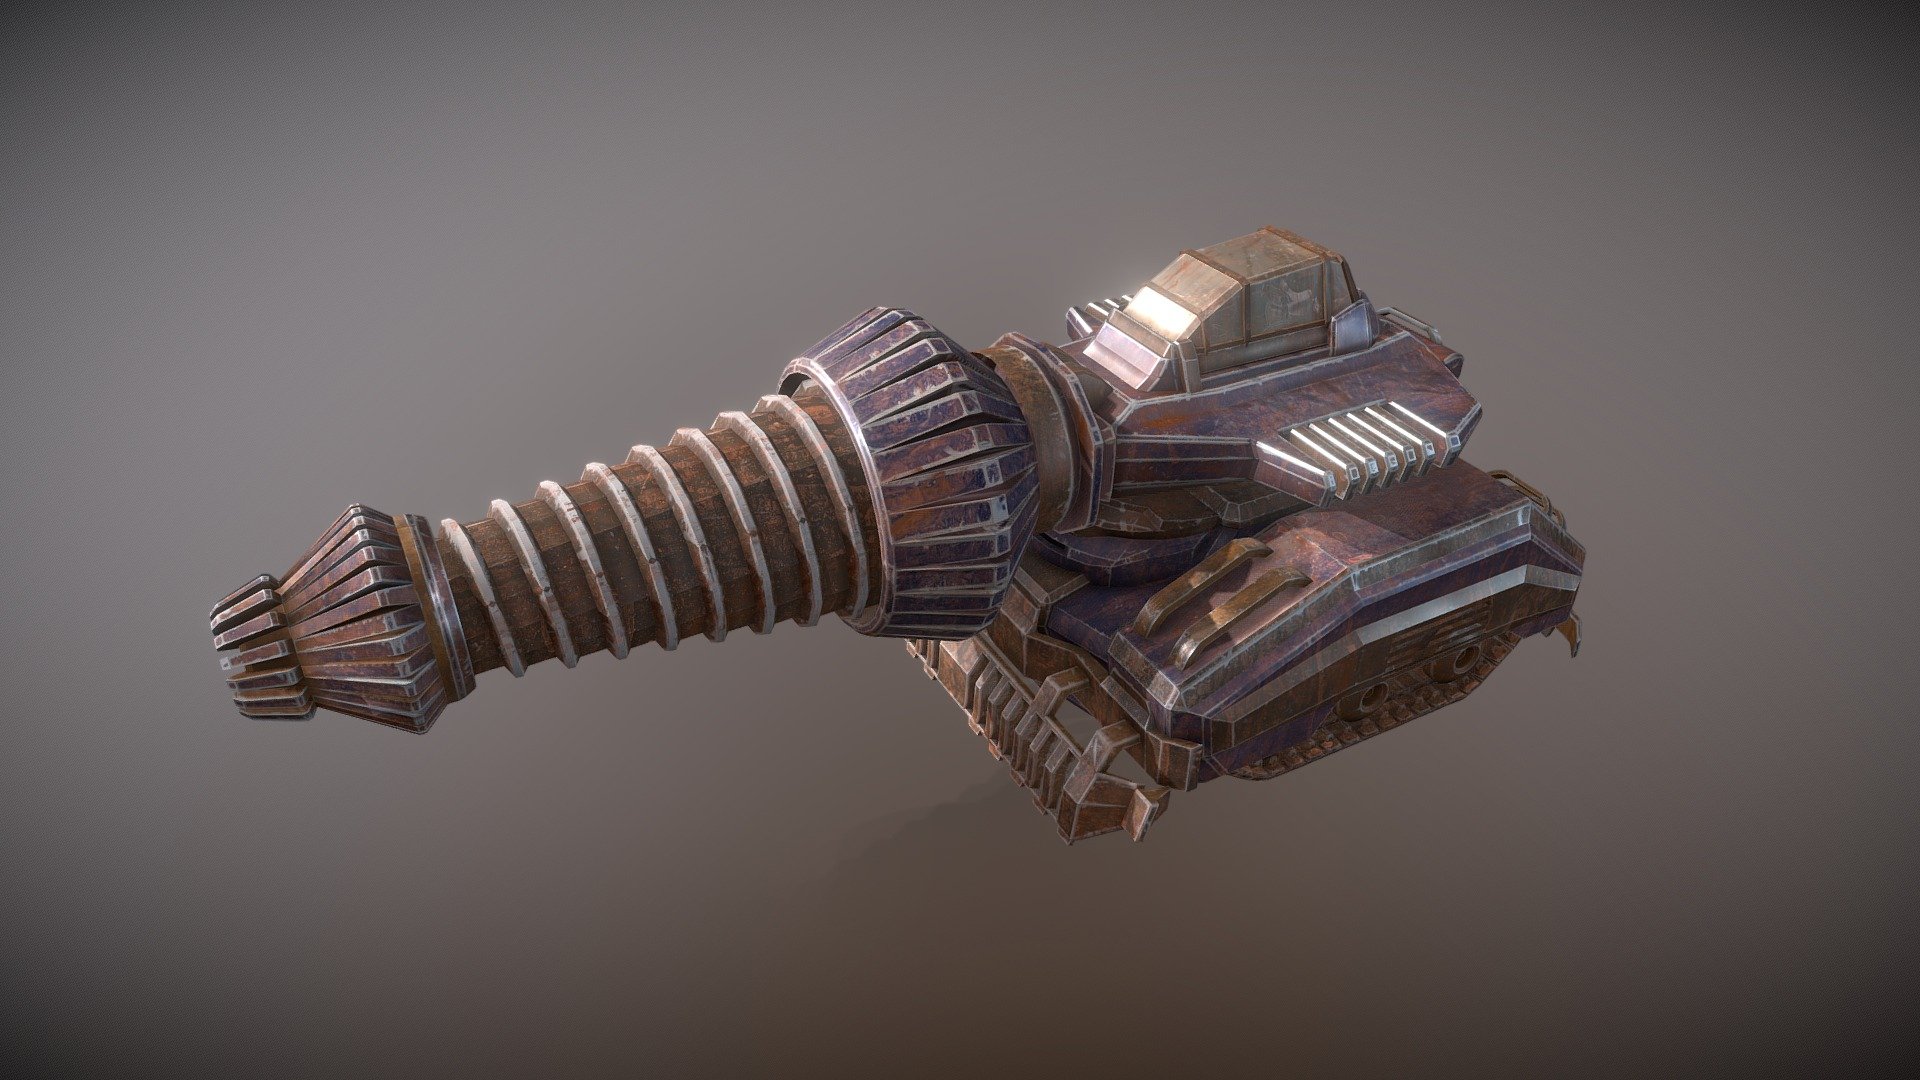 Animated Drill Tank low poly model - Drill Tank Animated - 3D model by denzmoon 3d model